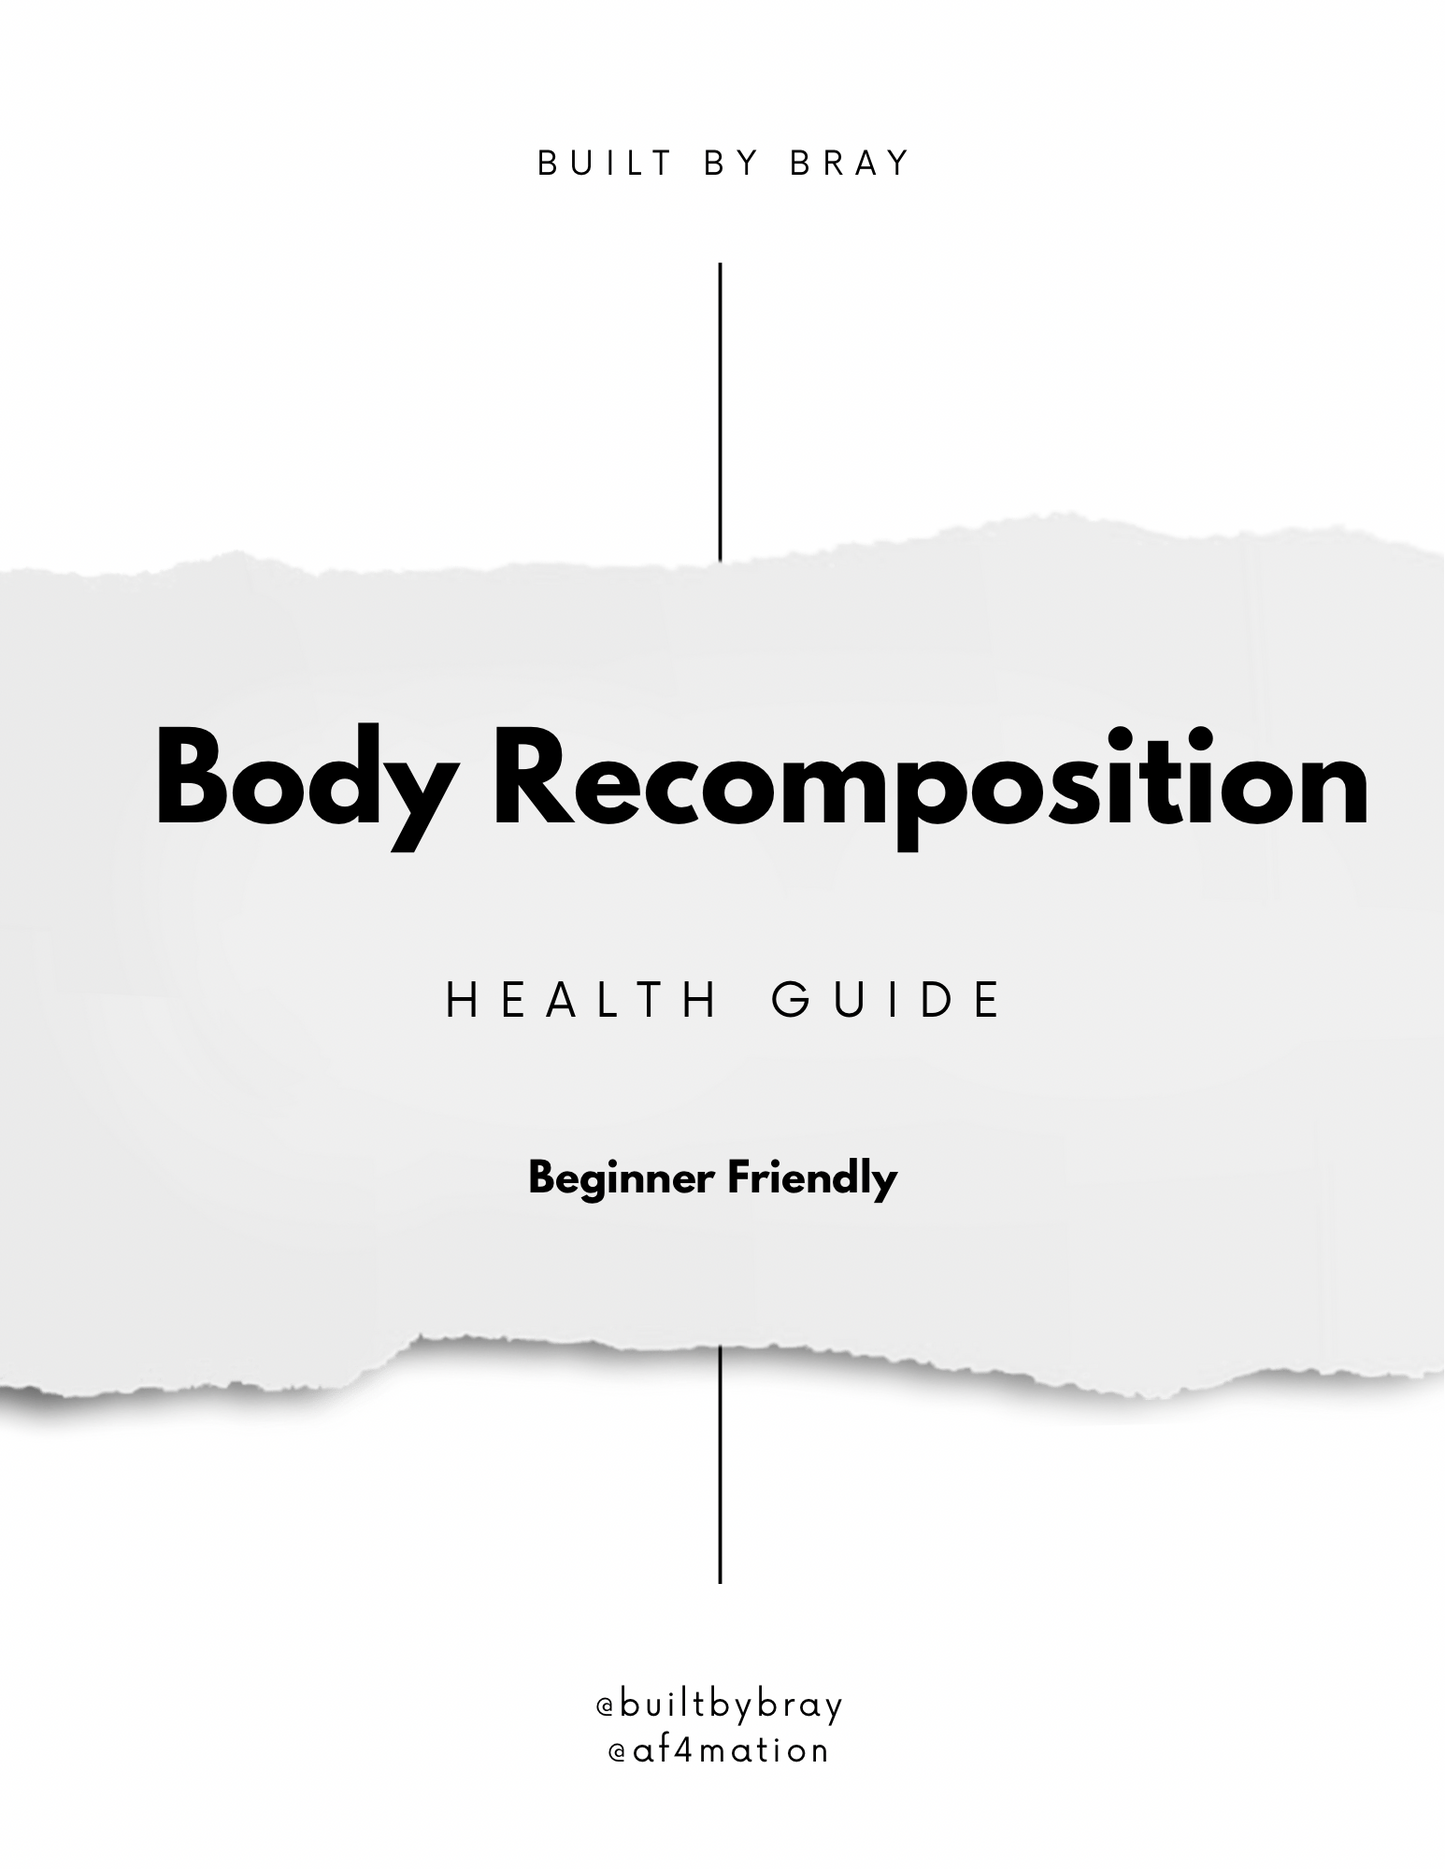 Body Recomposition Guide @builtbybray (digital file)